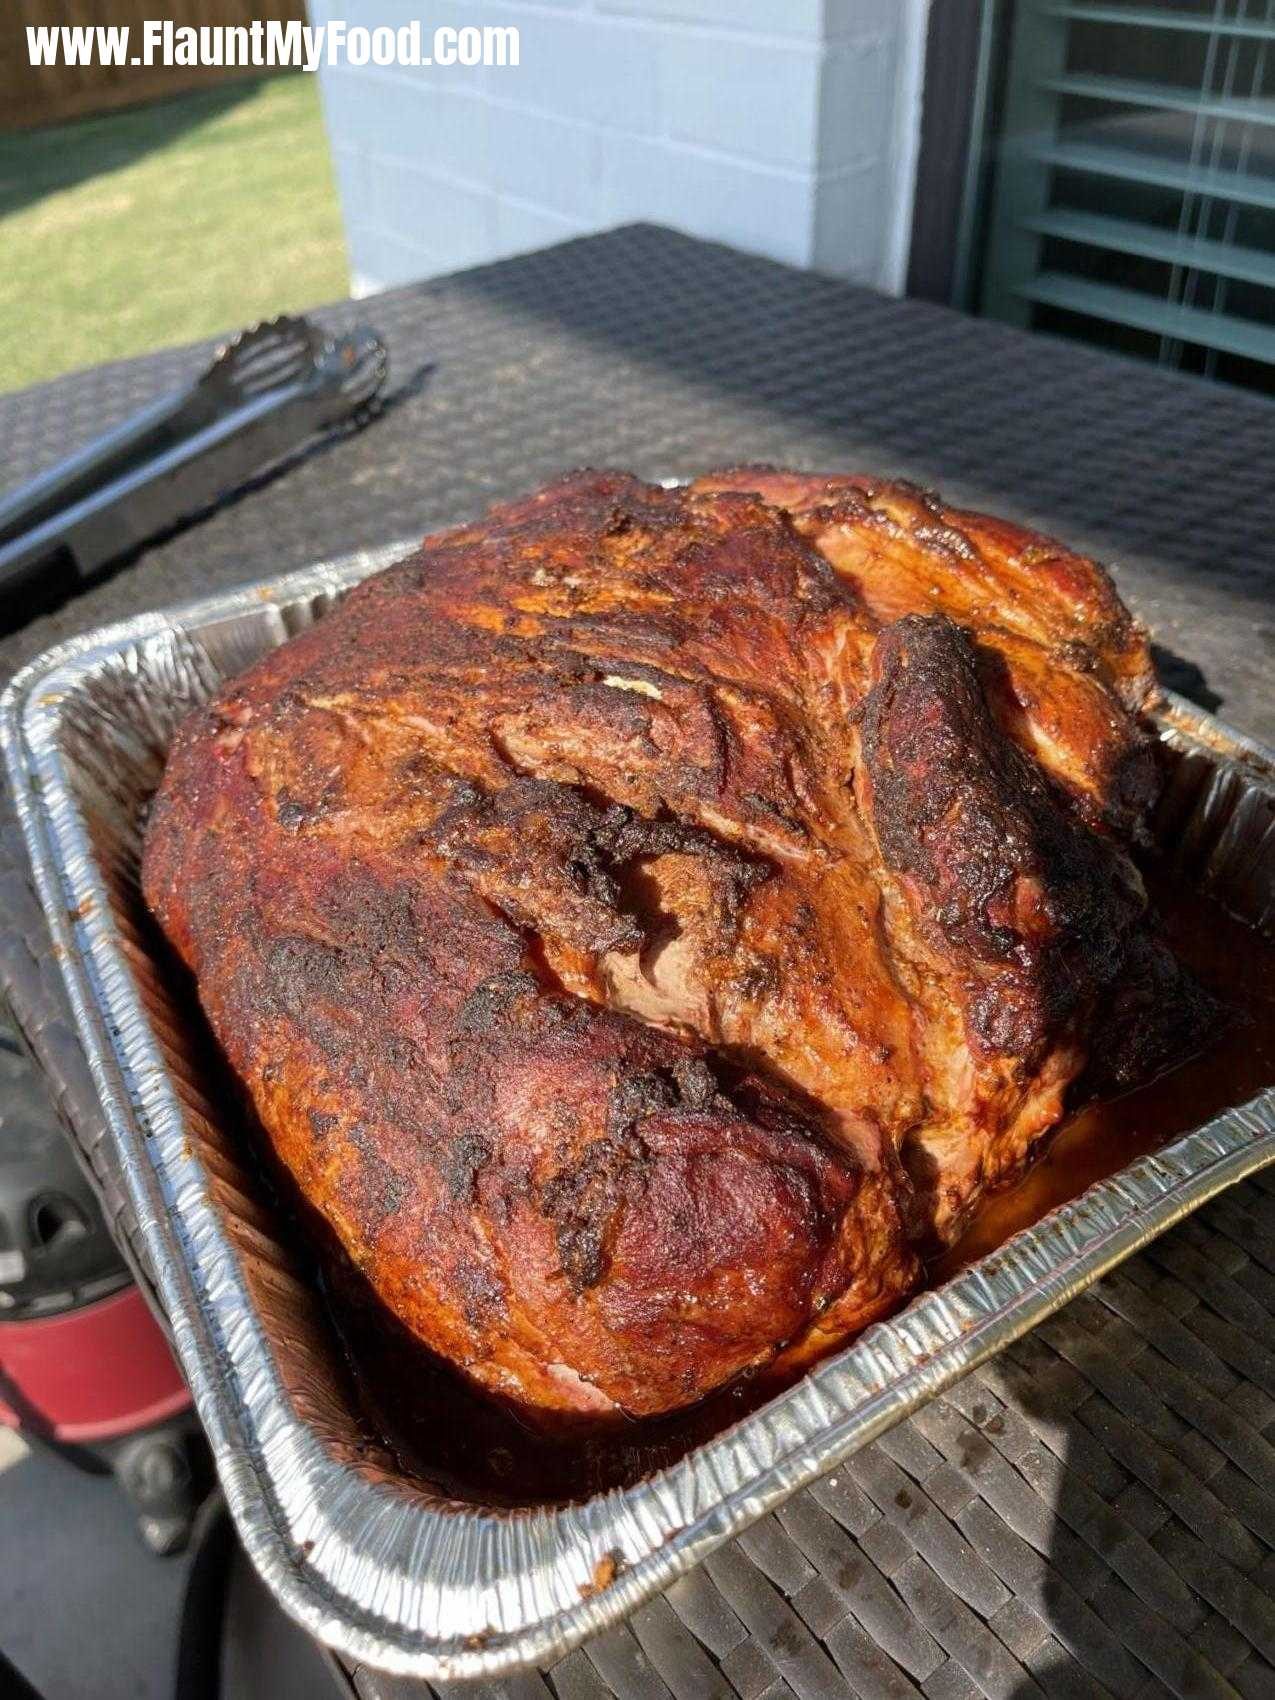 Master Smoker Bret - Some delicious roasted pork butts home grilled and roasted in a slow cooker by a master chef down in south Texas area.Master Smoker Bret - Some delicious roasted pork butts home grilled and roasted in a slow cooker by a master chef down in south Texas area.